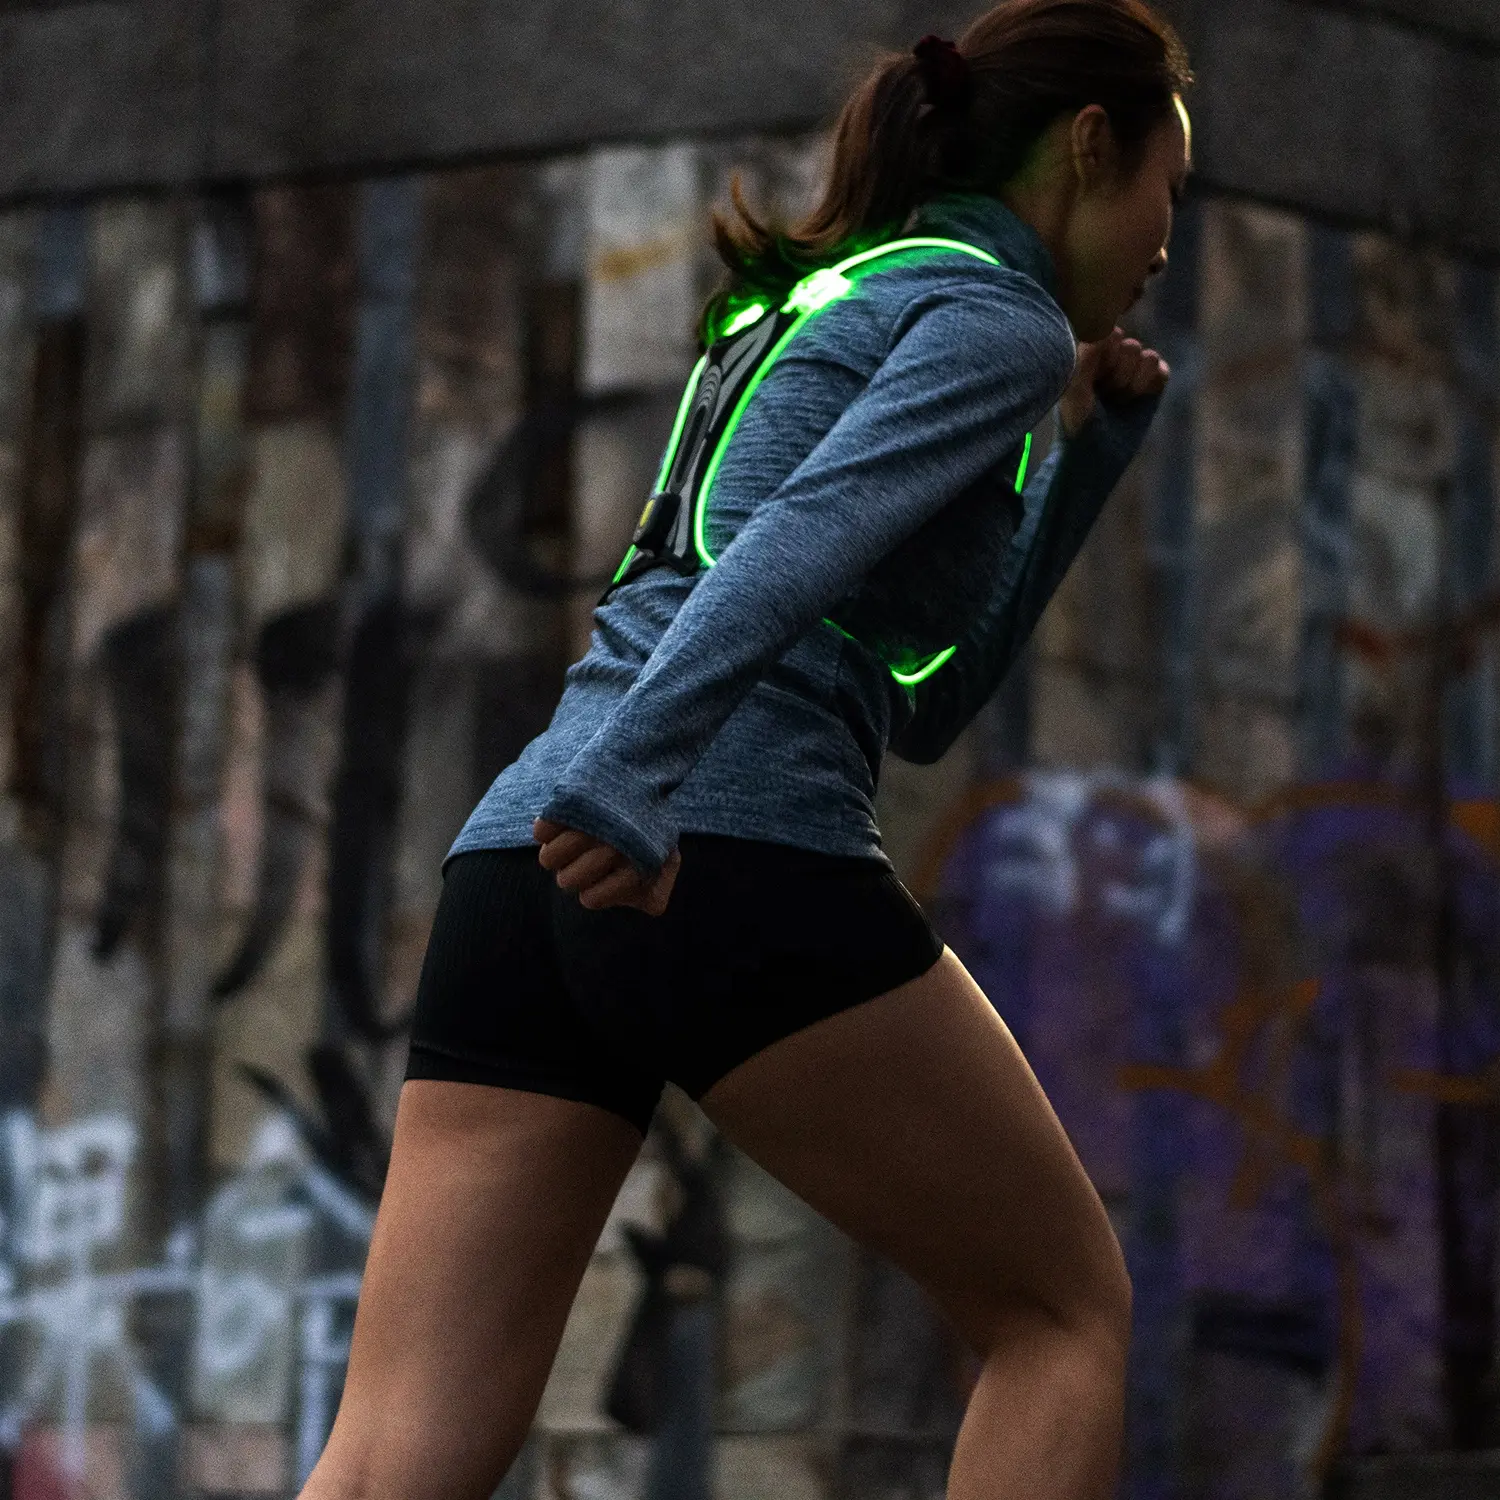 Super Bright 360 USB Rechargeable Flashing LED Running Vest for Road Safety